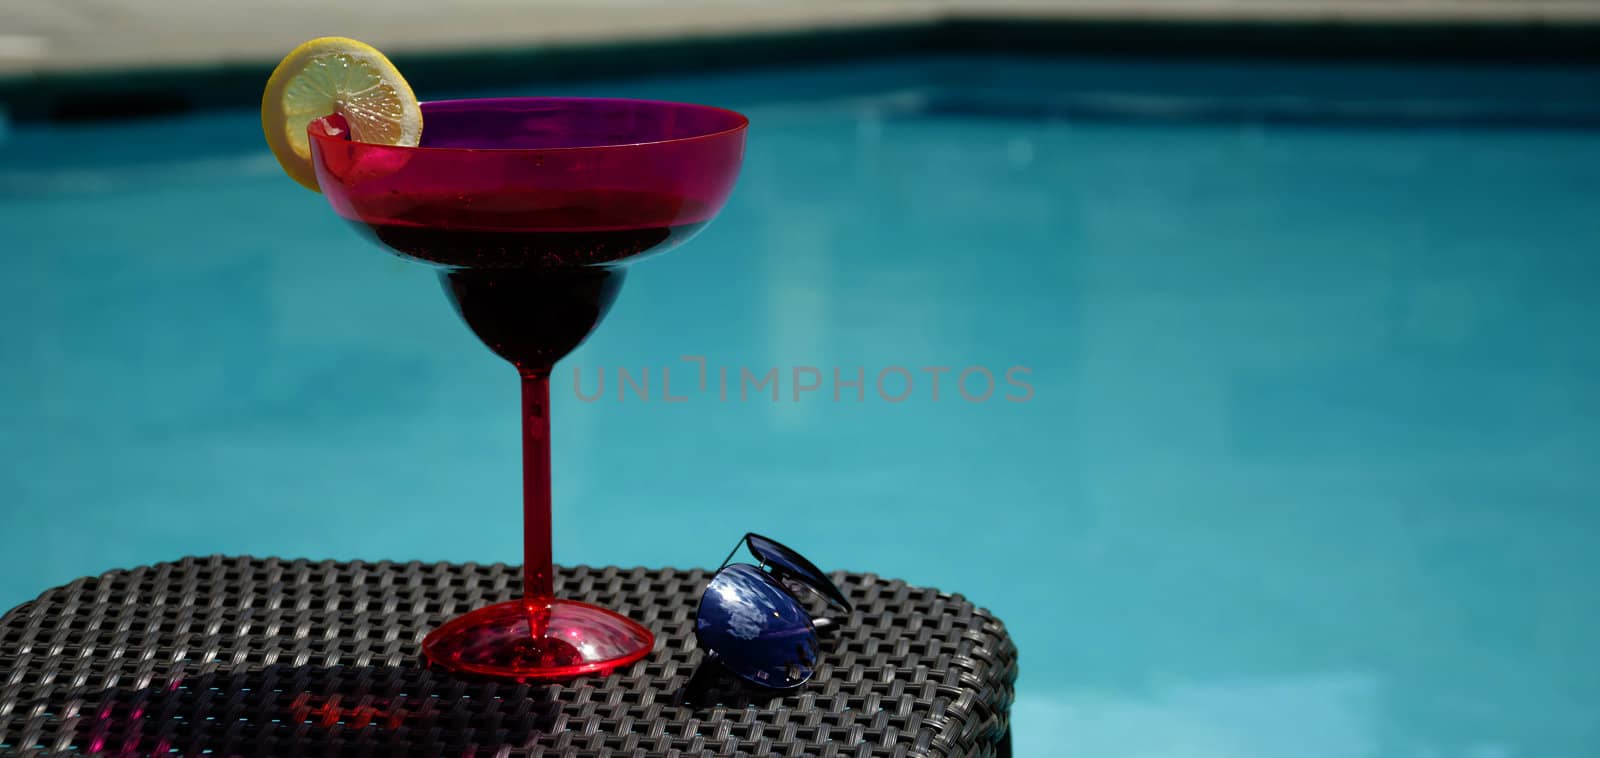 Drink and sunglasses by the pool by EllenSmile